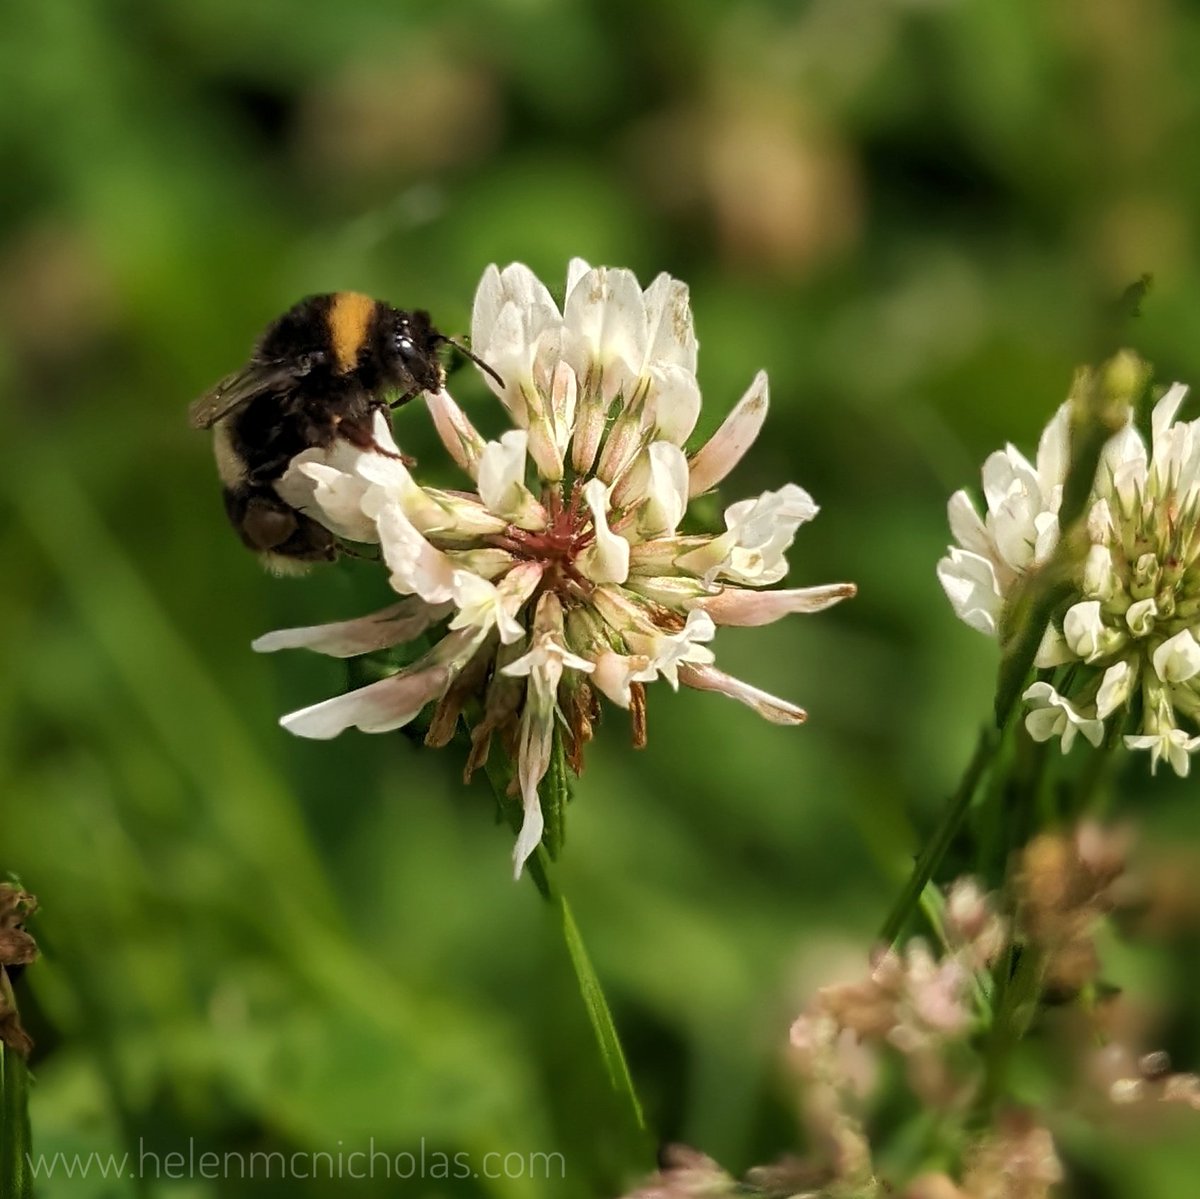 The bees are loving the clover 🤩

#bees #garden #inmygarden #mygardentoday #clover #gardenersworld #gardenforwildlife #gardenforbees